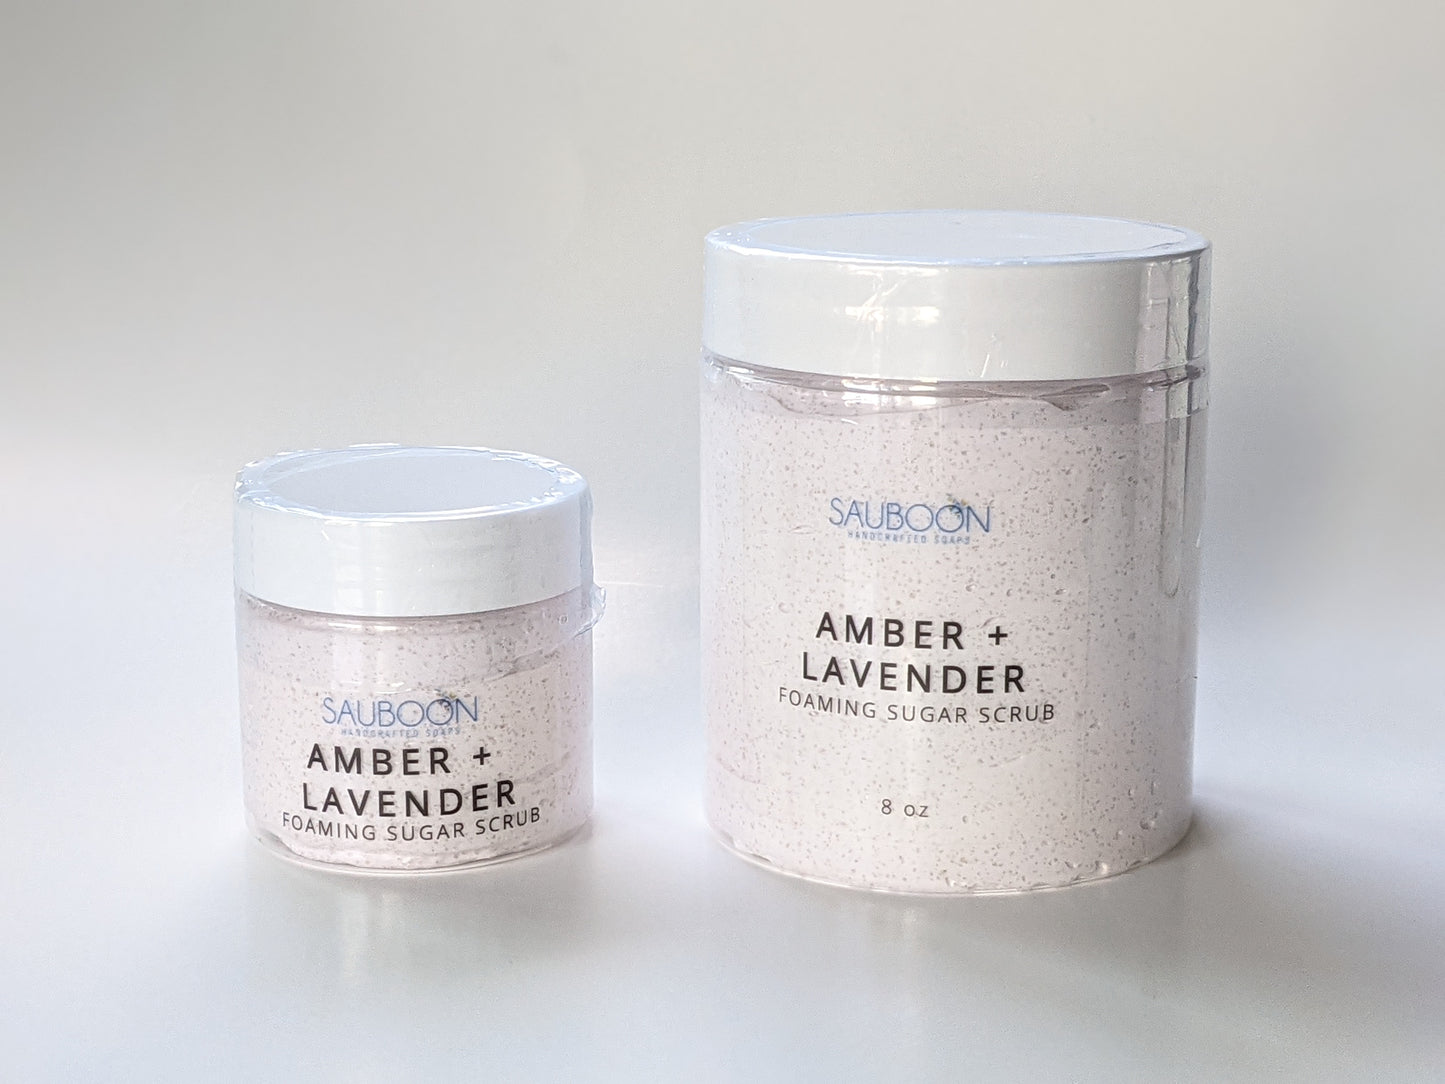 Amber + Lavender Foaming Sugar Scrubs. made locally here in San Diego in small batches.  Highest quality ingredients used to give the best lather, nourishment, exfoliation and cleansing experience.  Made with organic cane sugar, jojoba oil and sweet almond oil. Great for gifting for birthdays, celebrations, bridal showers or self care gift to yourself!